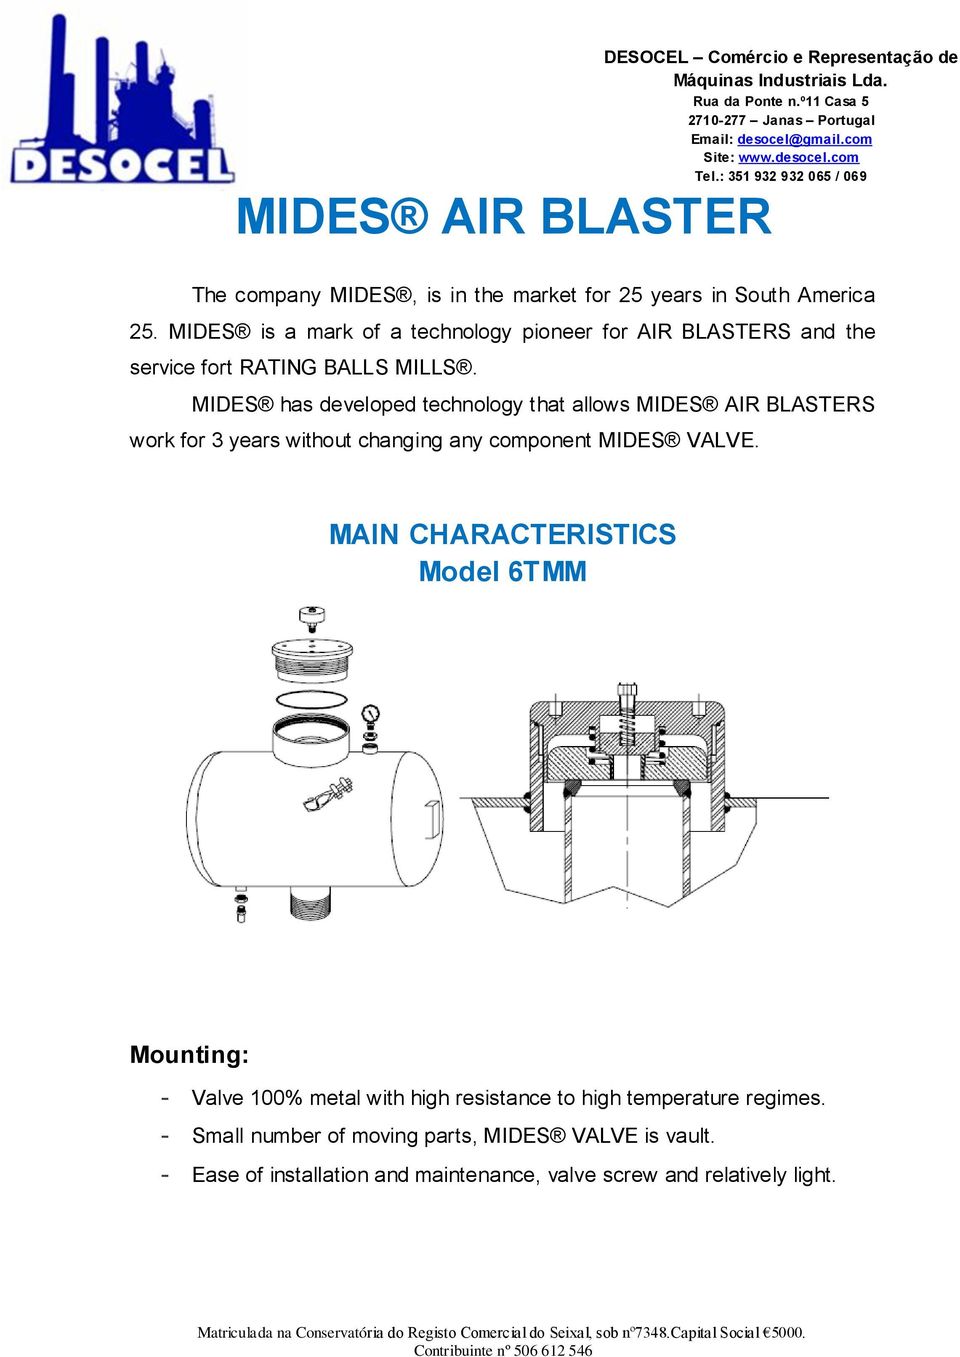 MIDES has developed technology that allows MIDES AIR BLASTERS work for 3 years without changing any component MIDES VALVE.